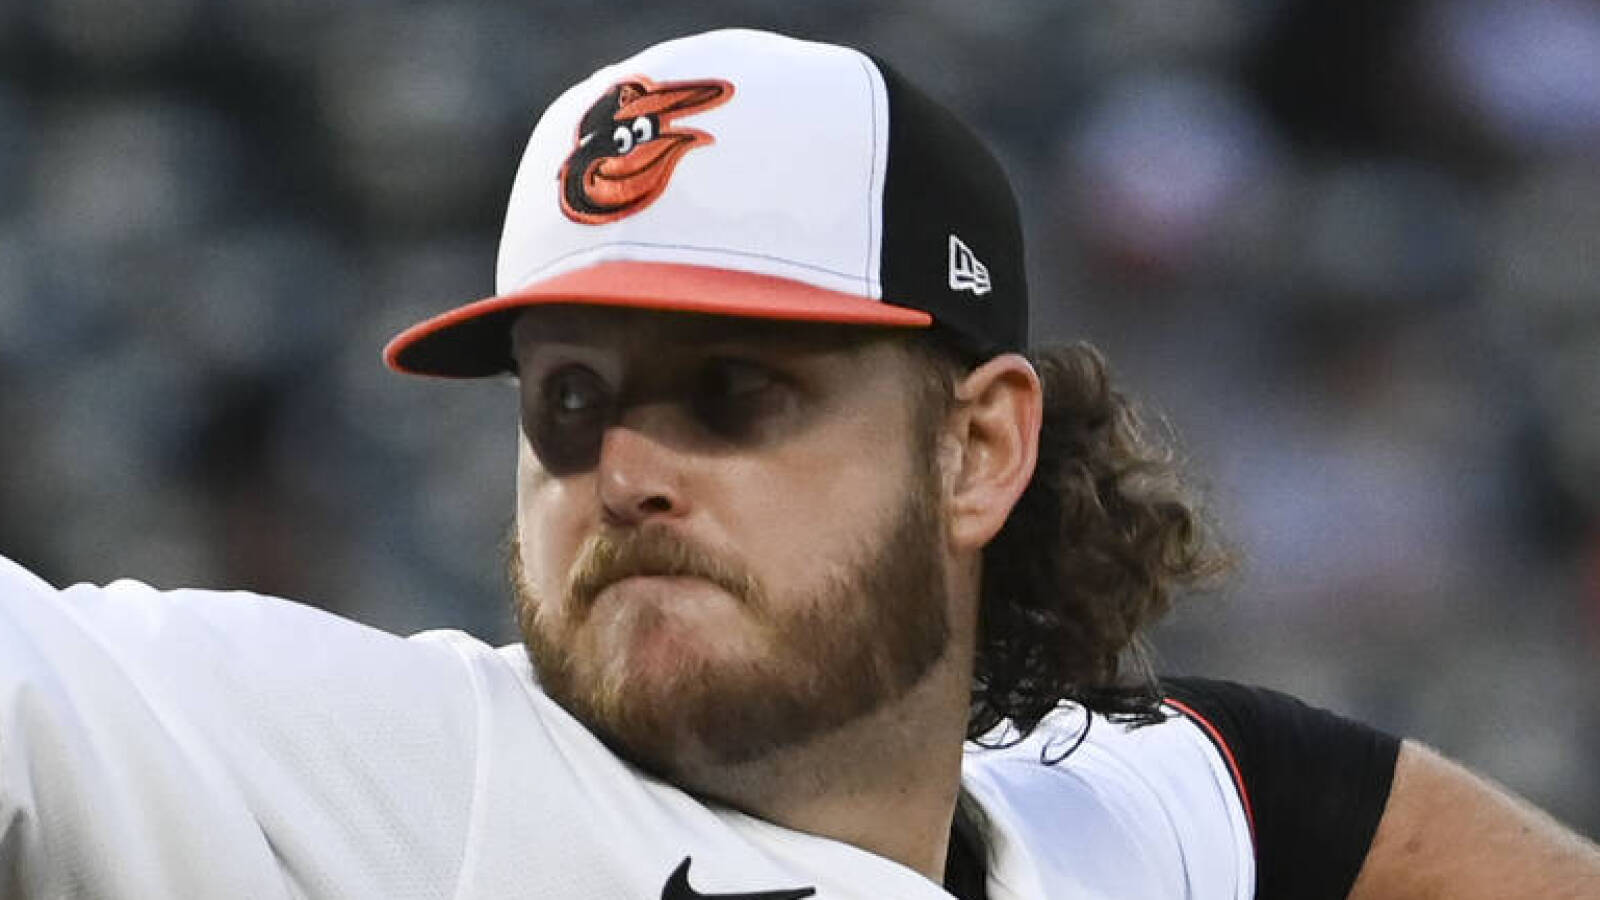 Watch: Orioles pitcher becomes latest victim of announcer jinx